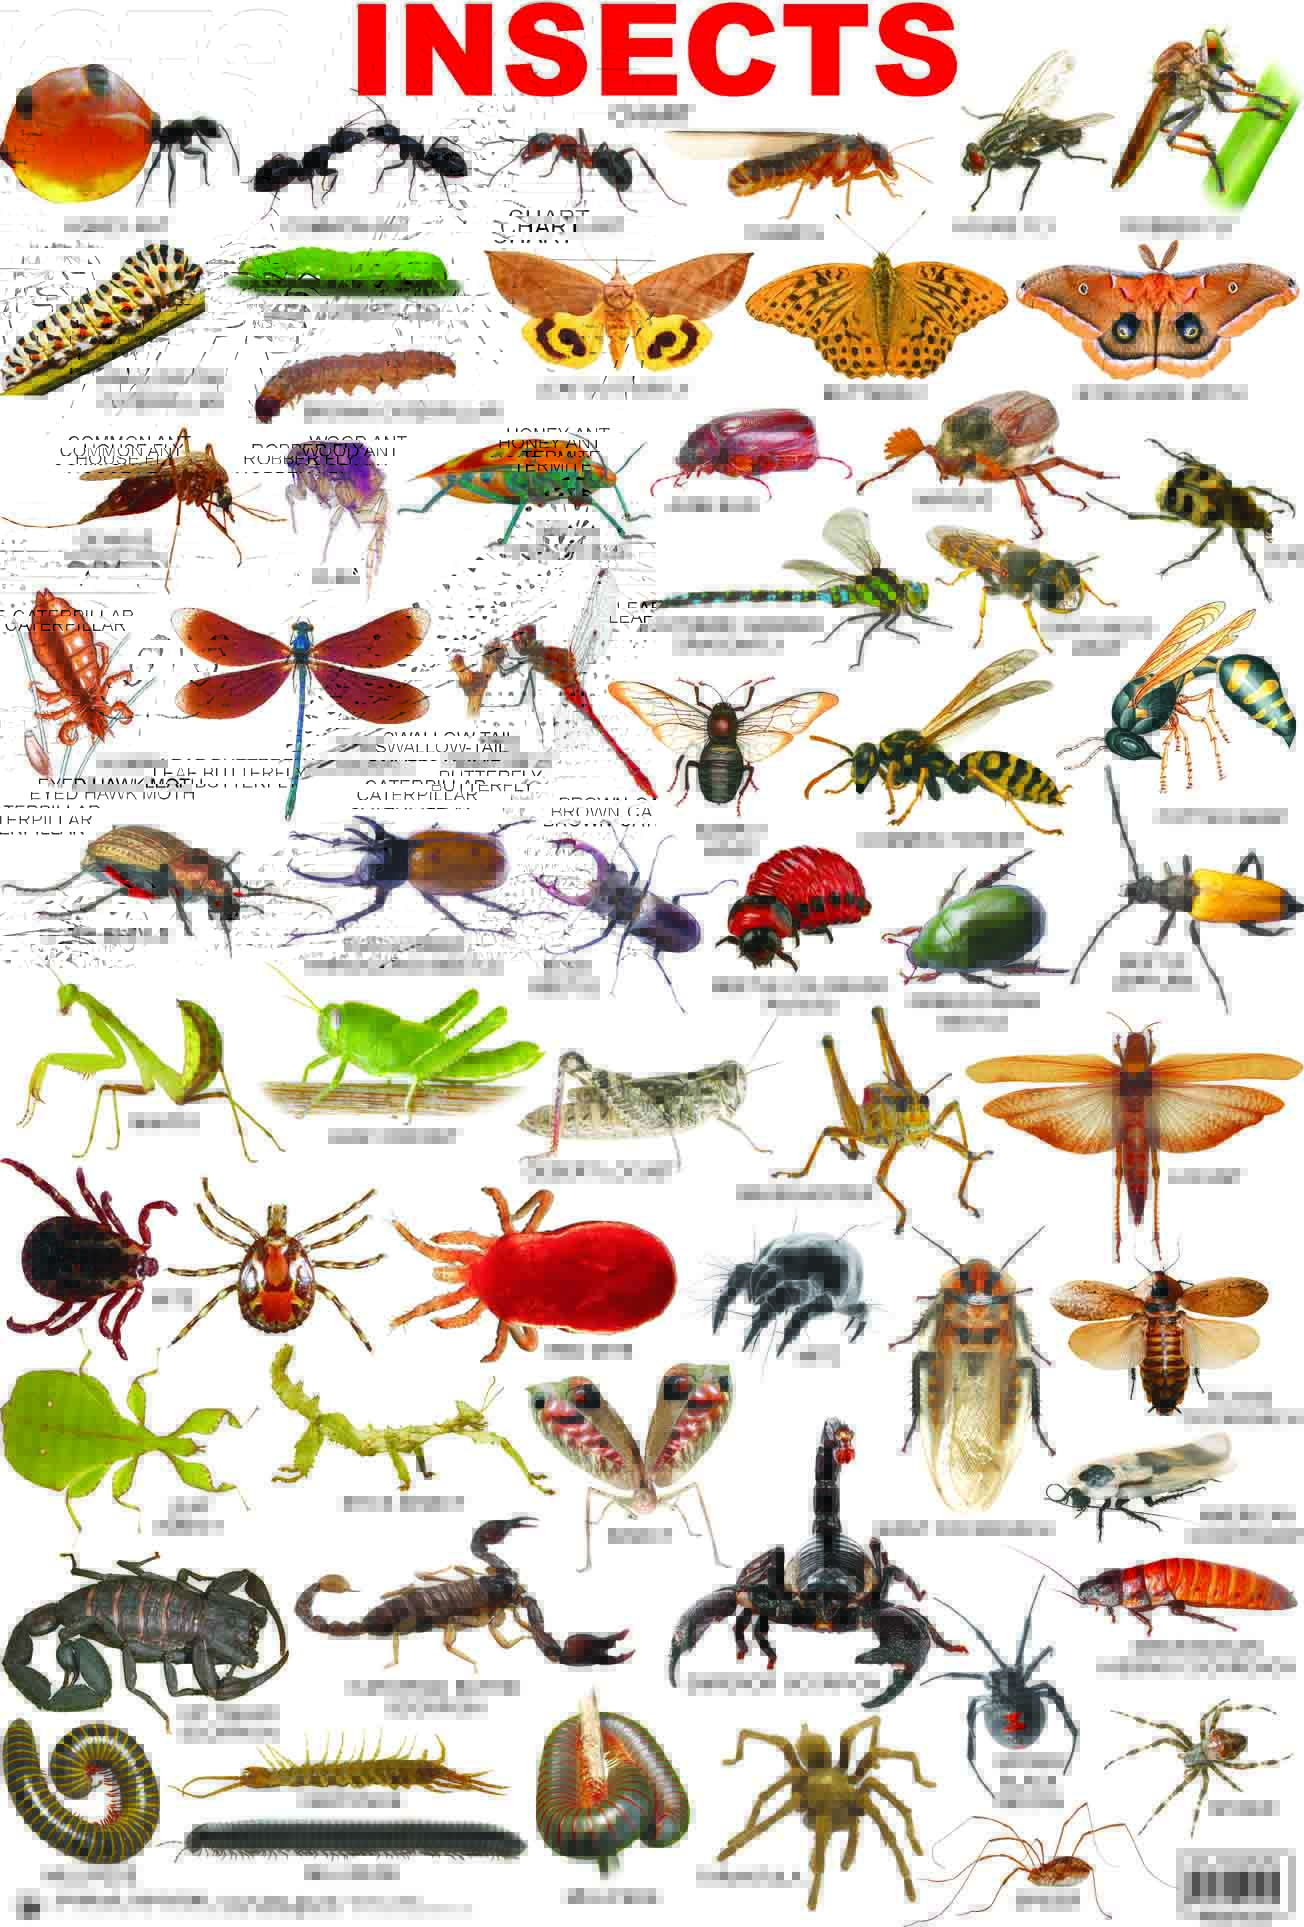 insect clipart name